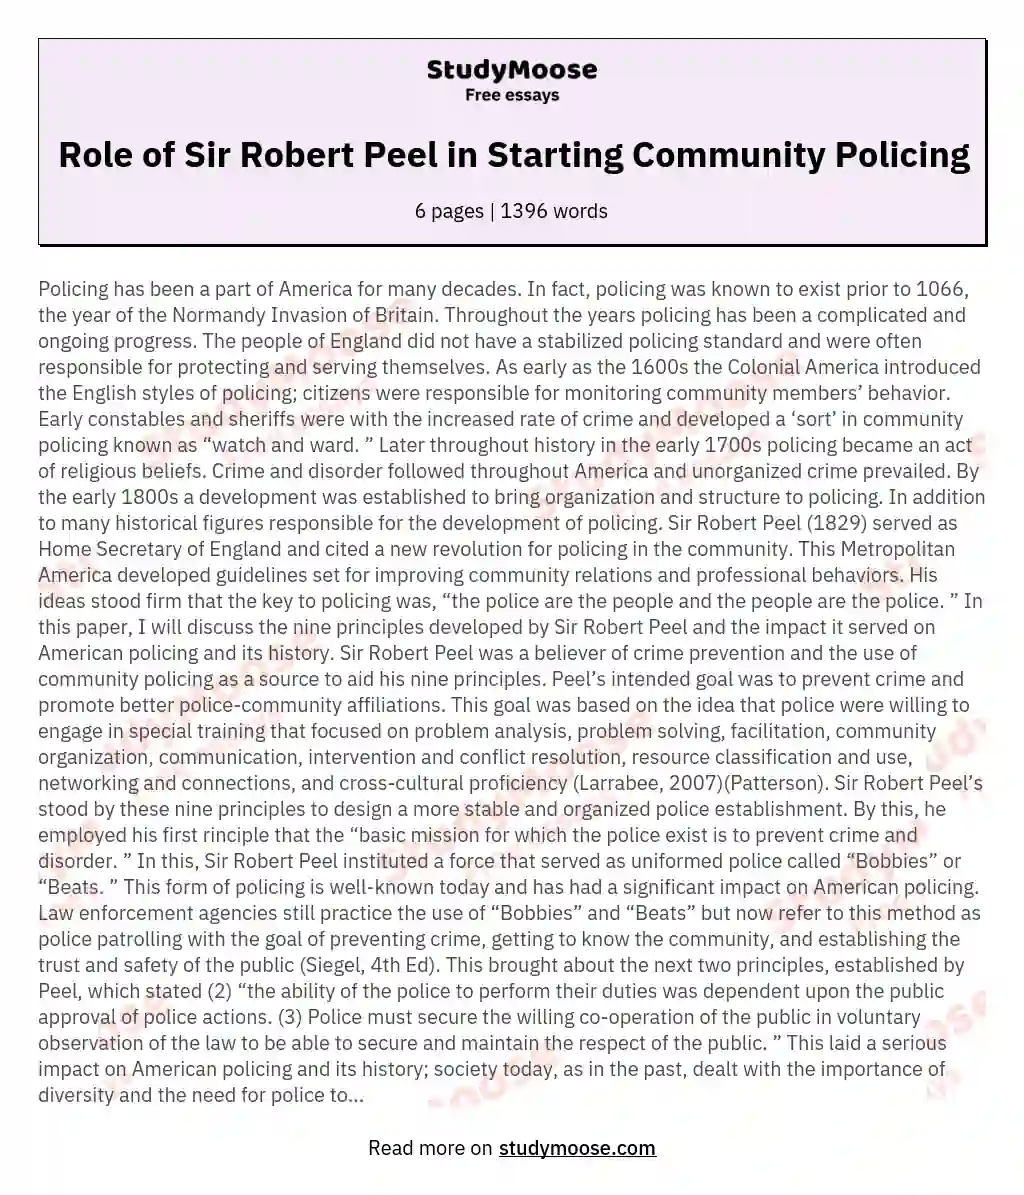 Role of Sir Robert Peel in Starting Community Policing